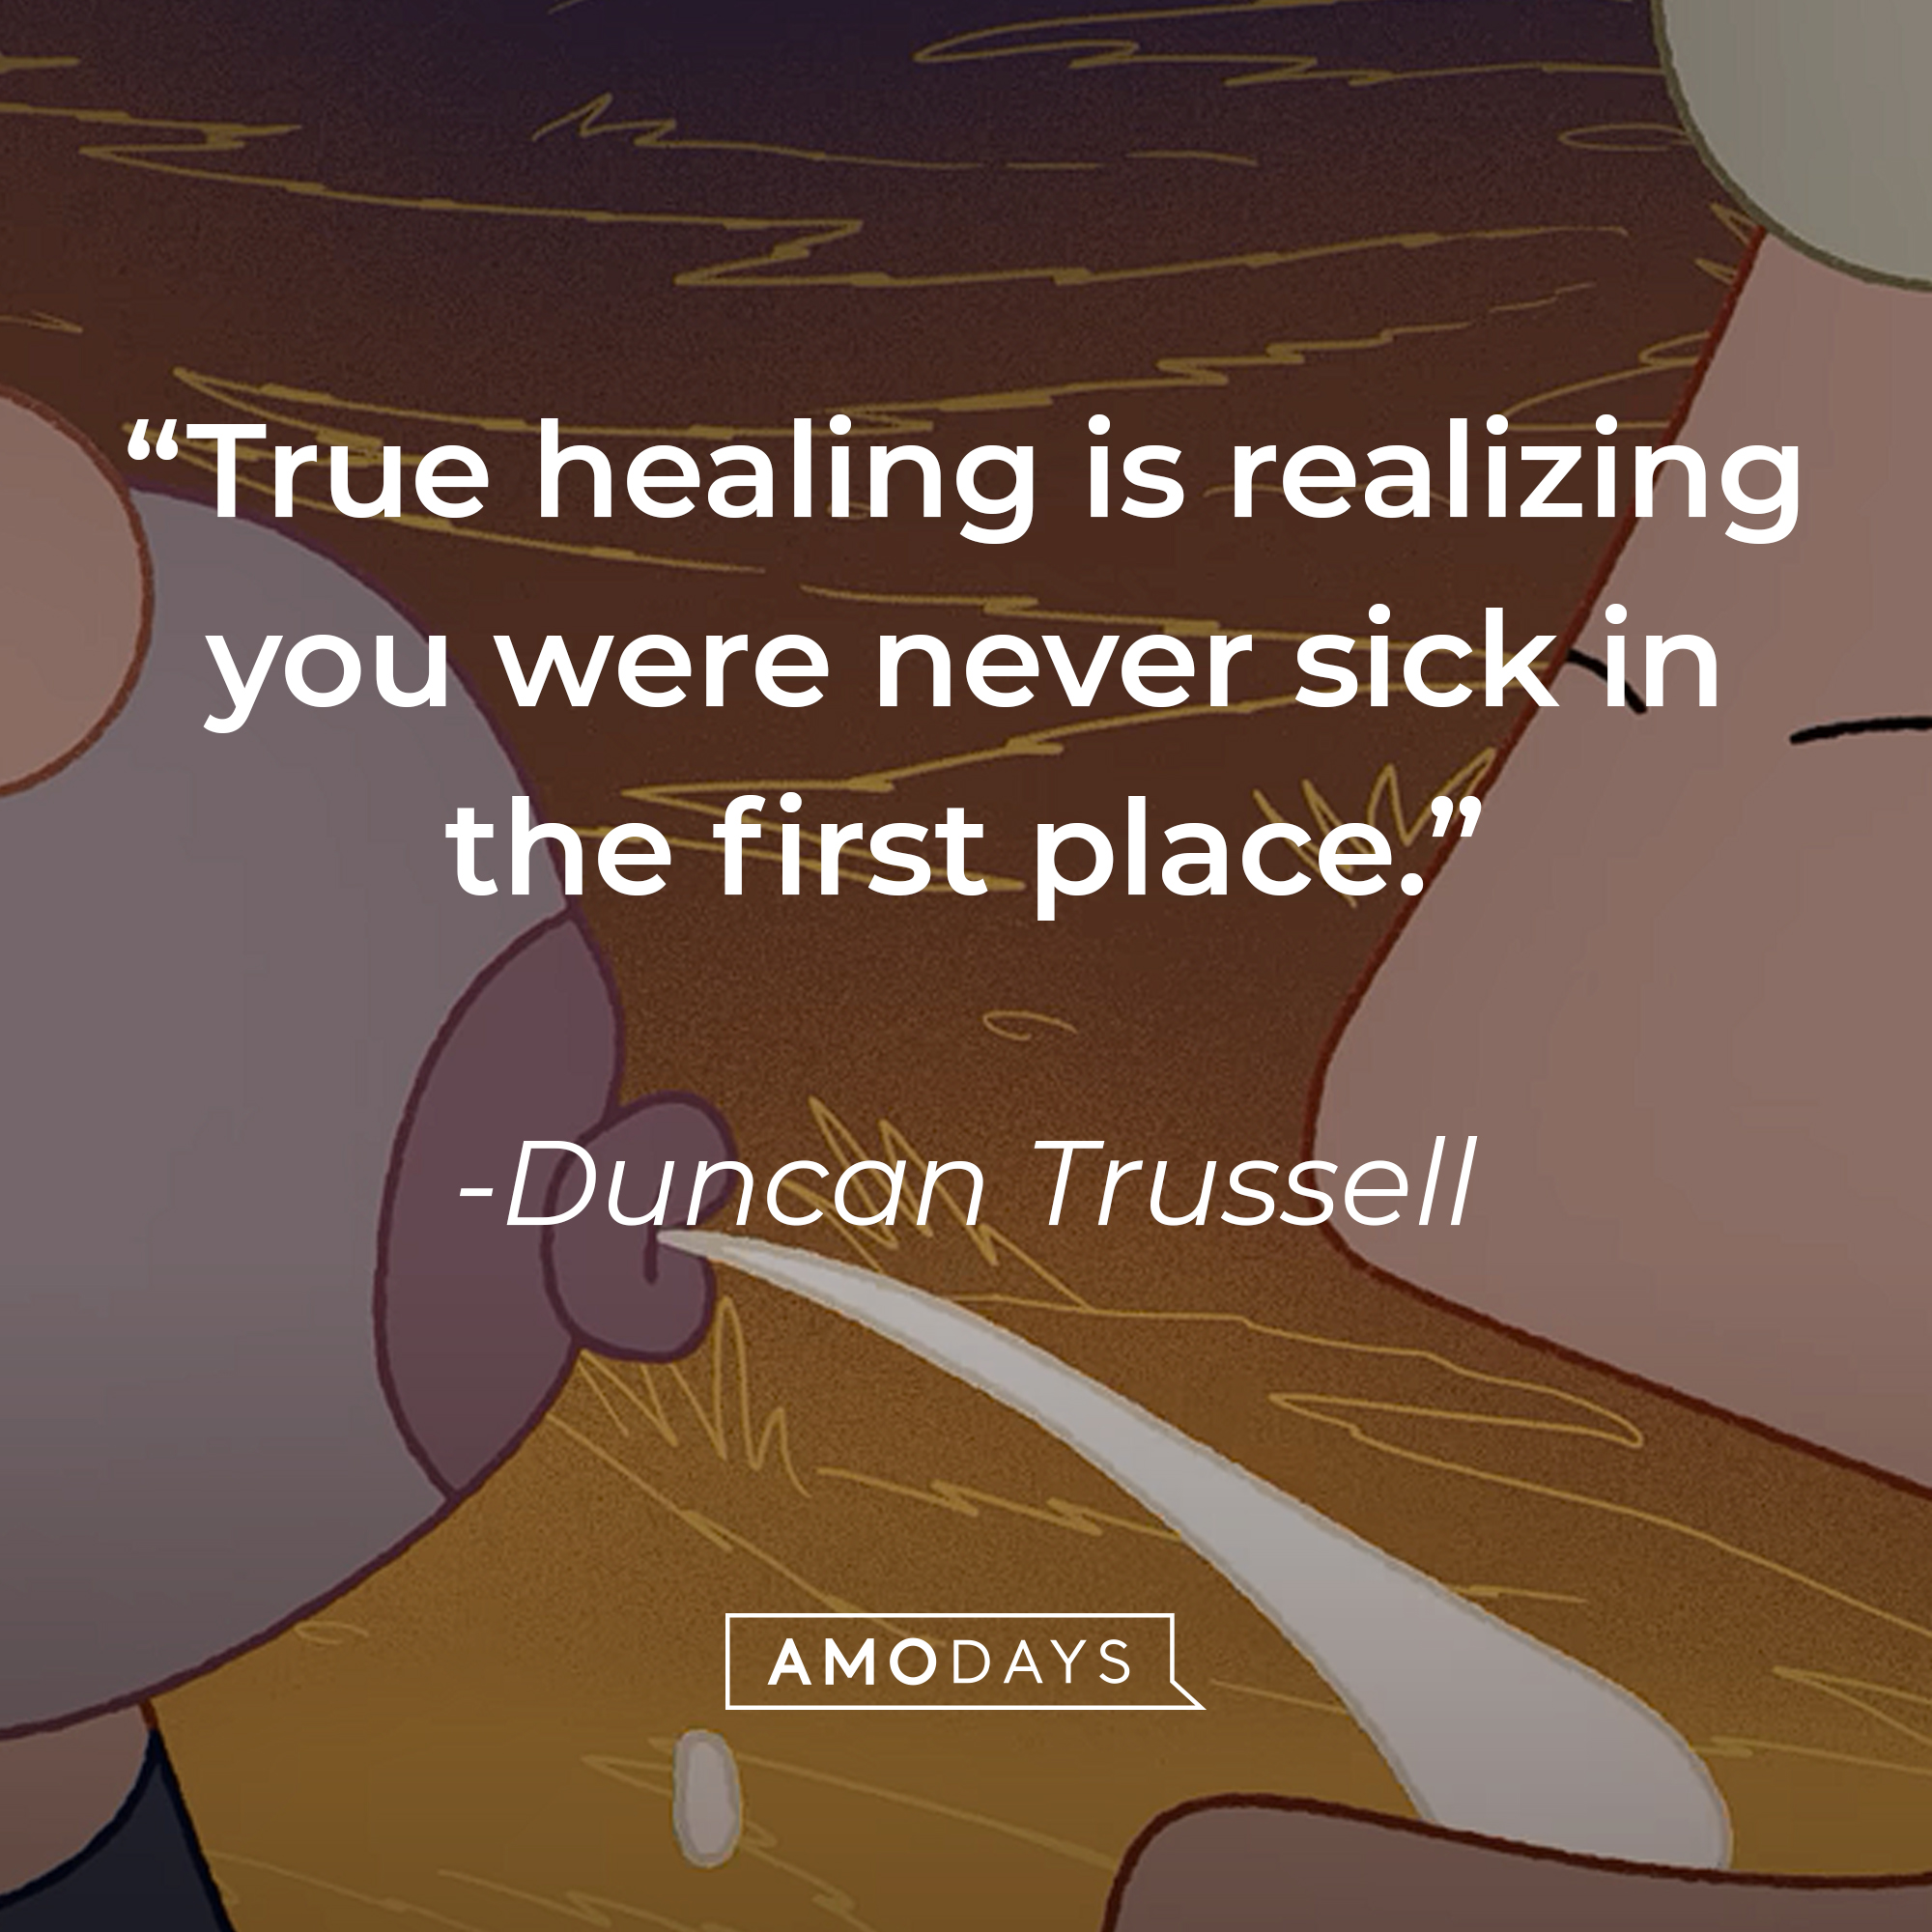 Duncan Trussell's quote: "True healing is realizing you were never sick in the first place." | Source: youtube.com/Netflix